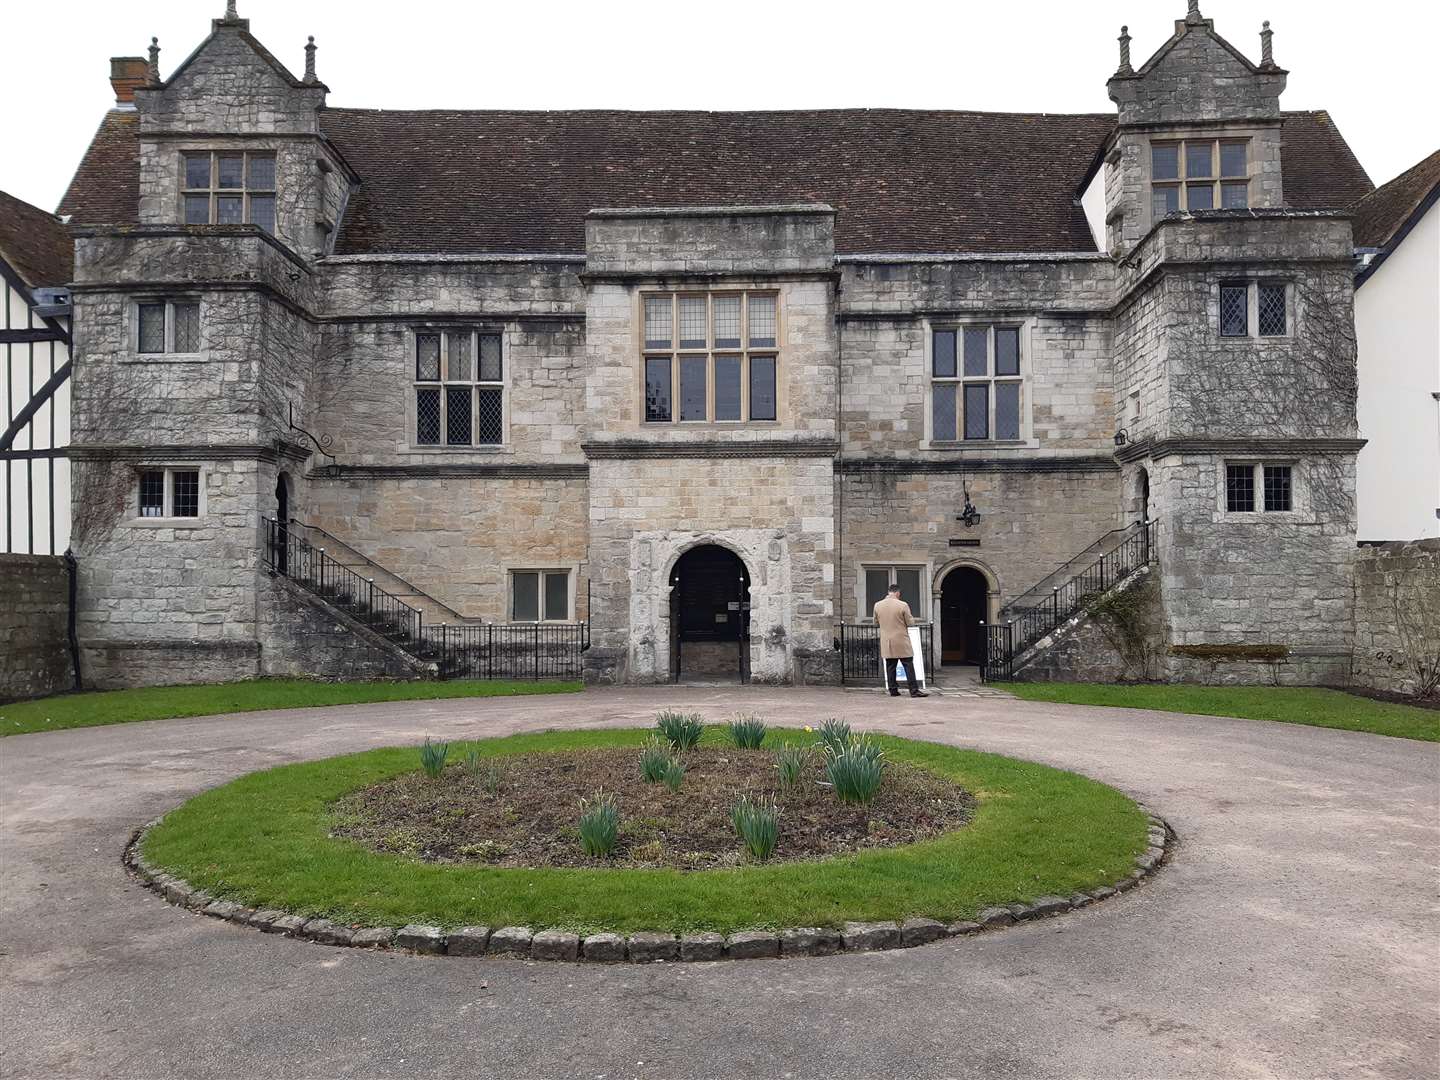 The Archbishop Palace in Maidstone has been made available for let by the council